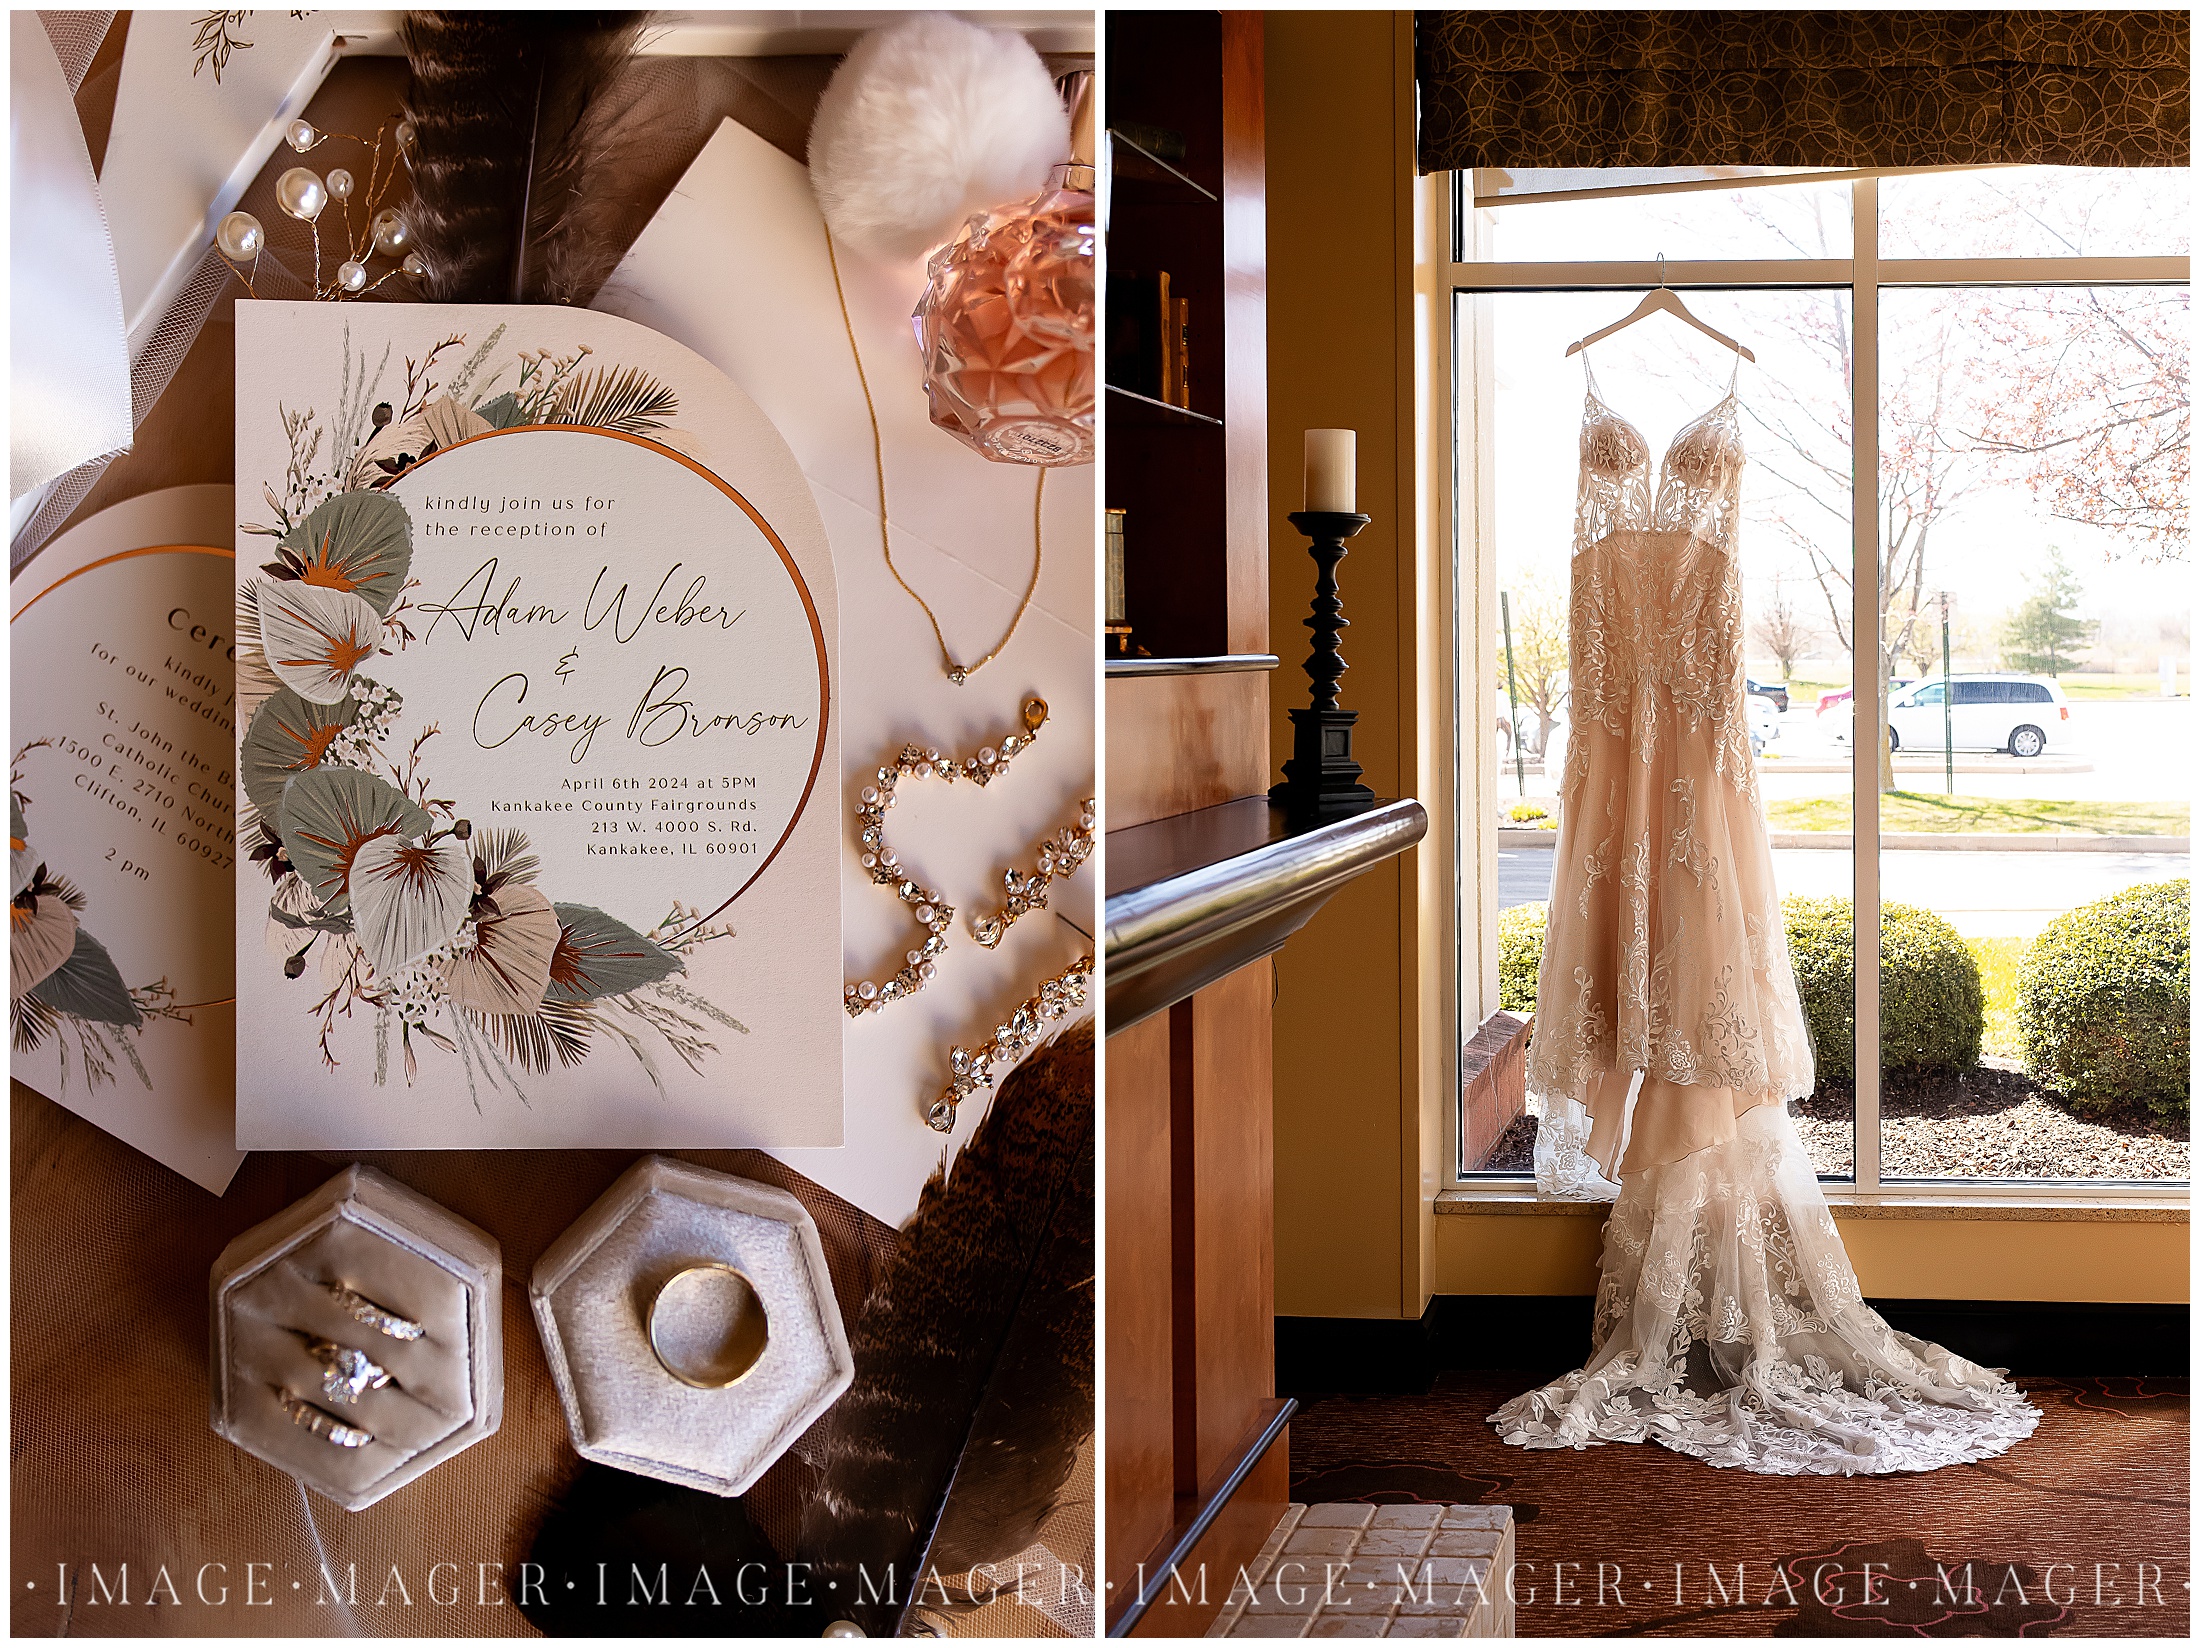 A small town wedding two image collage. The first image contains the invitation suite along with the couple's rings and the brides jewelry. The second image is of the bride's trumpet style gown hanging in a window.

Photo taken by Mager Image Photography.